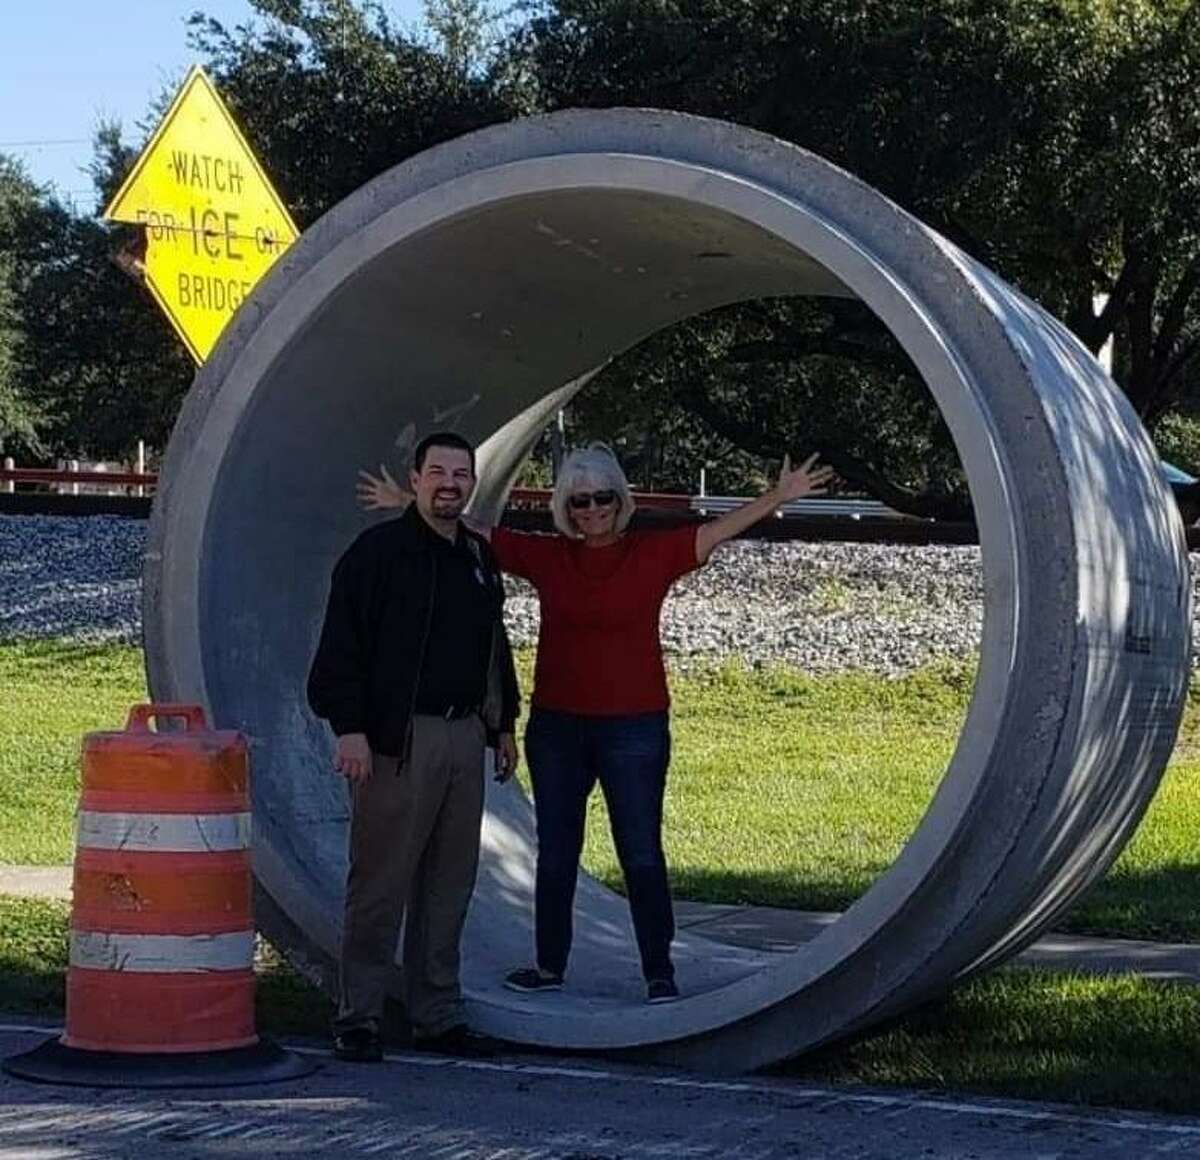 Katy City Councilman Chris Harris and City Councilwoman Janet Corte check out the 8-foot diameter storm sewer pipes that will be used in the First Street project that includes flood mitigation and a road upgrade.